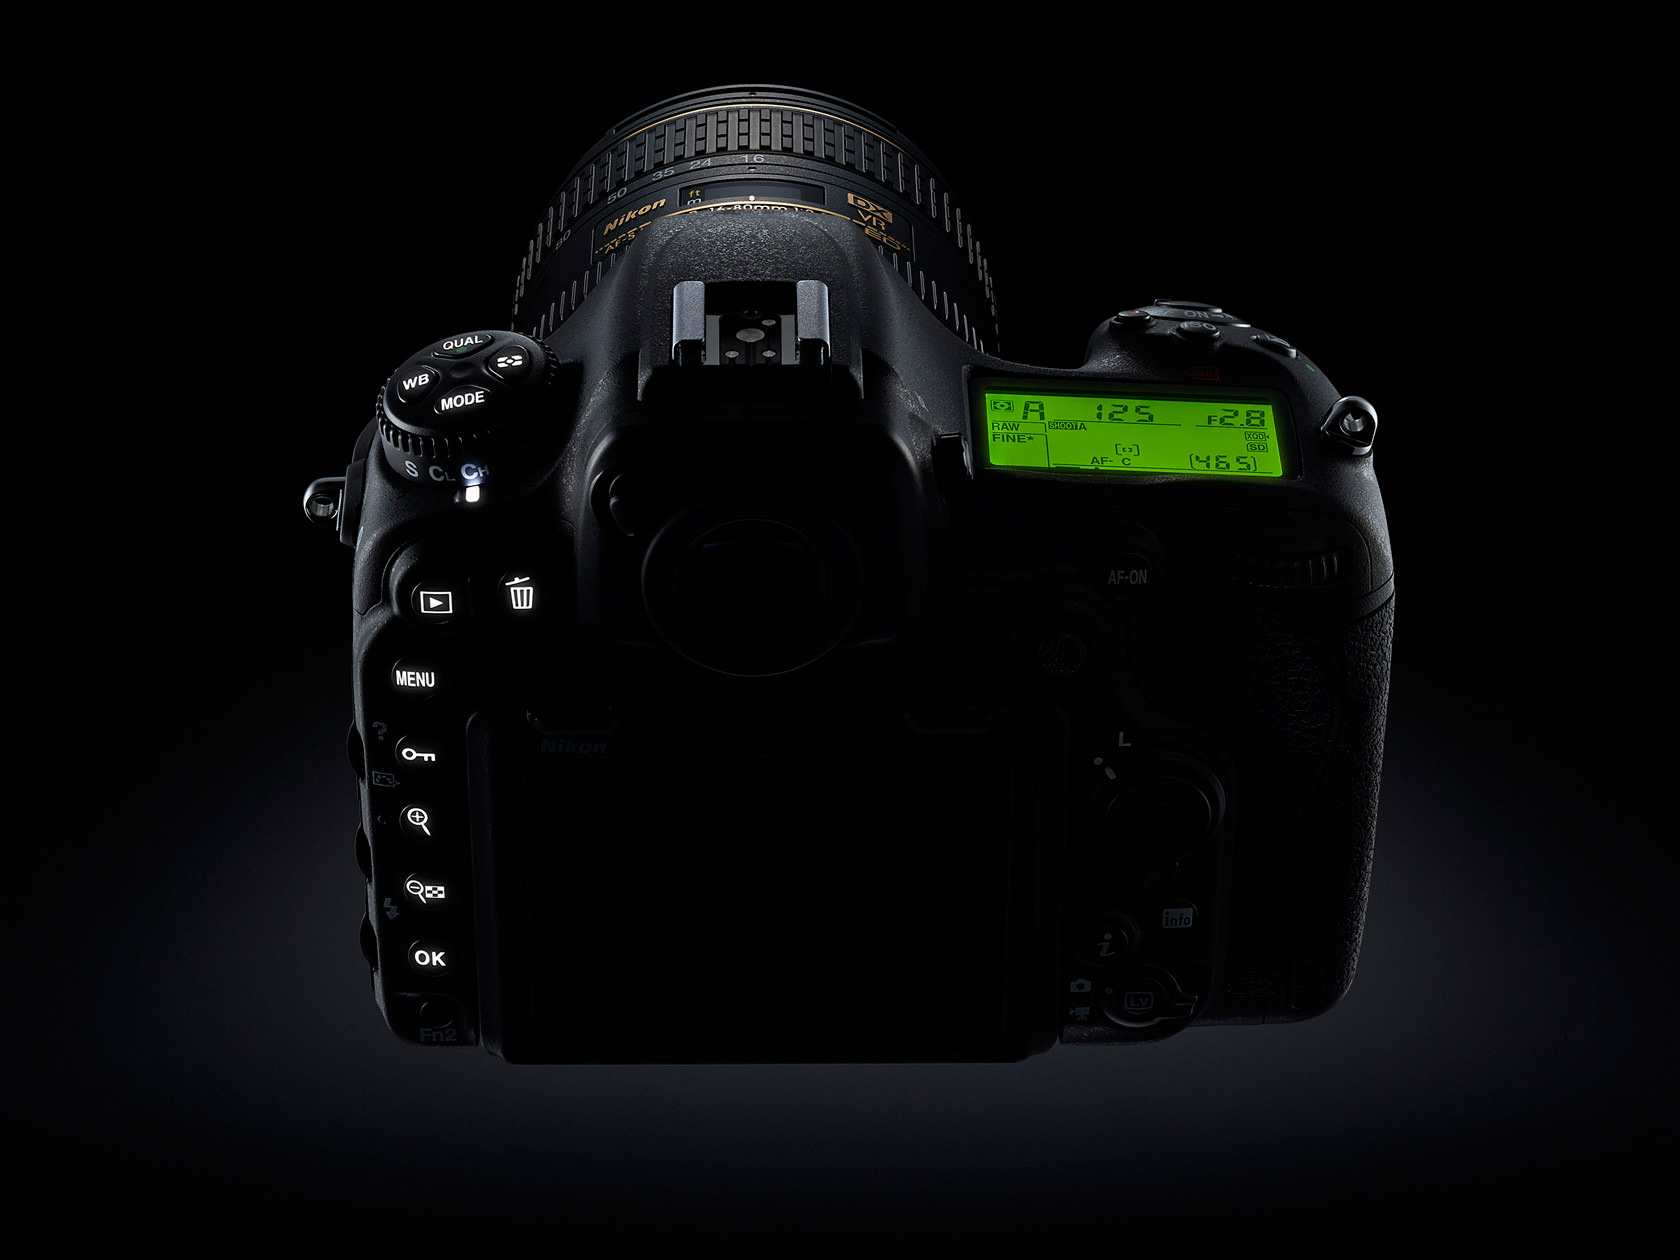 Nikon D500 Review: In the Hands of a Wildlife Photographer - Nature TTL